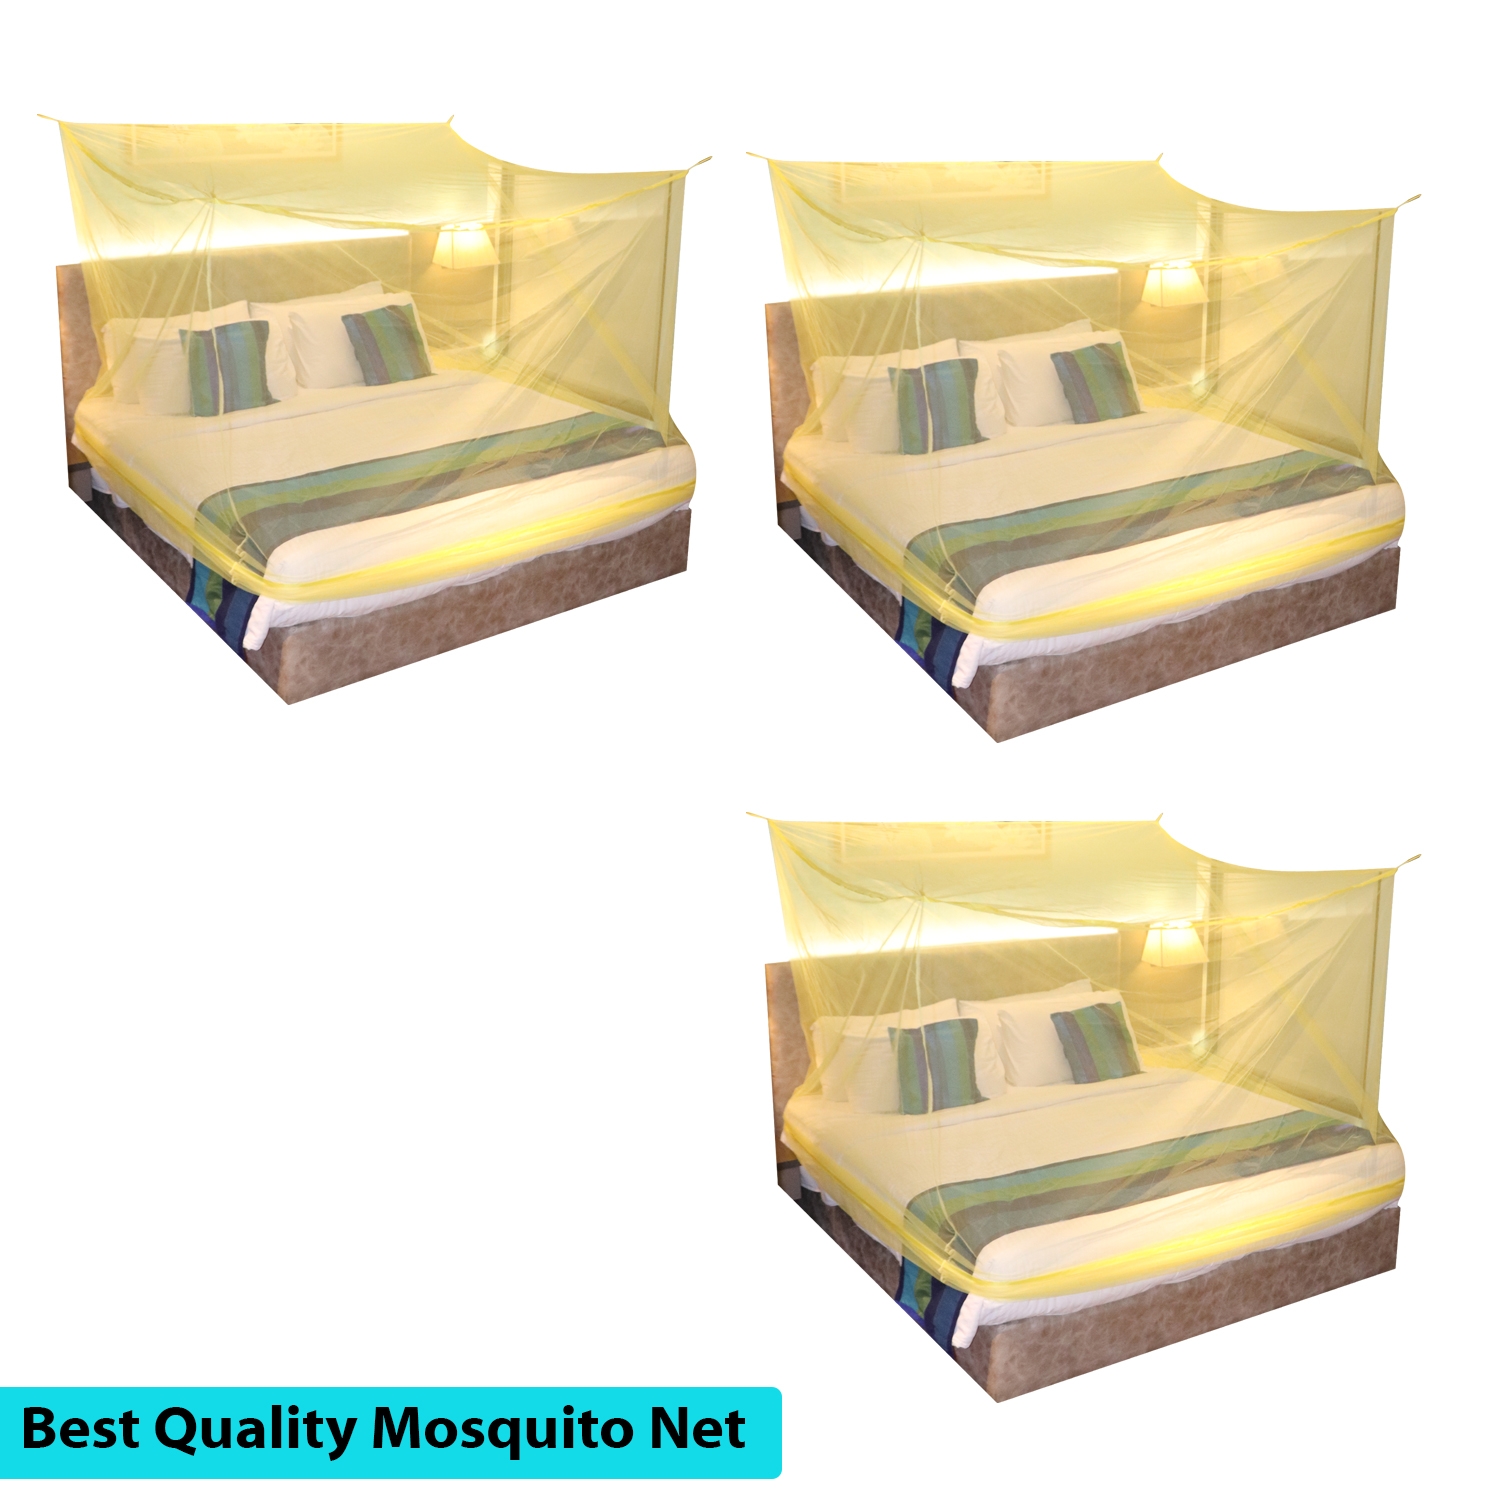 SILVER SHINE | Mosquito Net for Double Bed, King-Size, Square Hanging Foldable Polyester Net YellowPack of 3